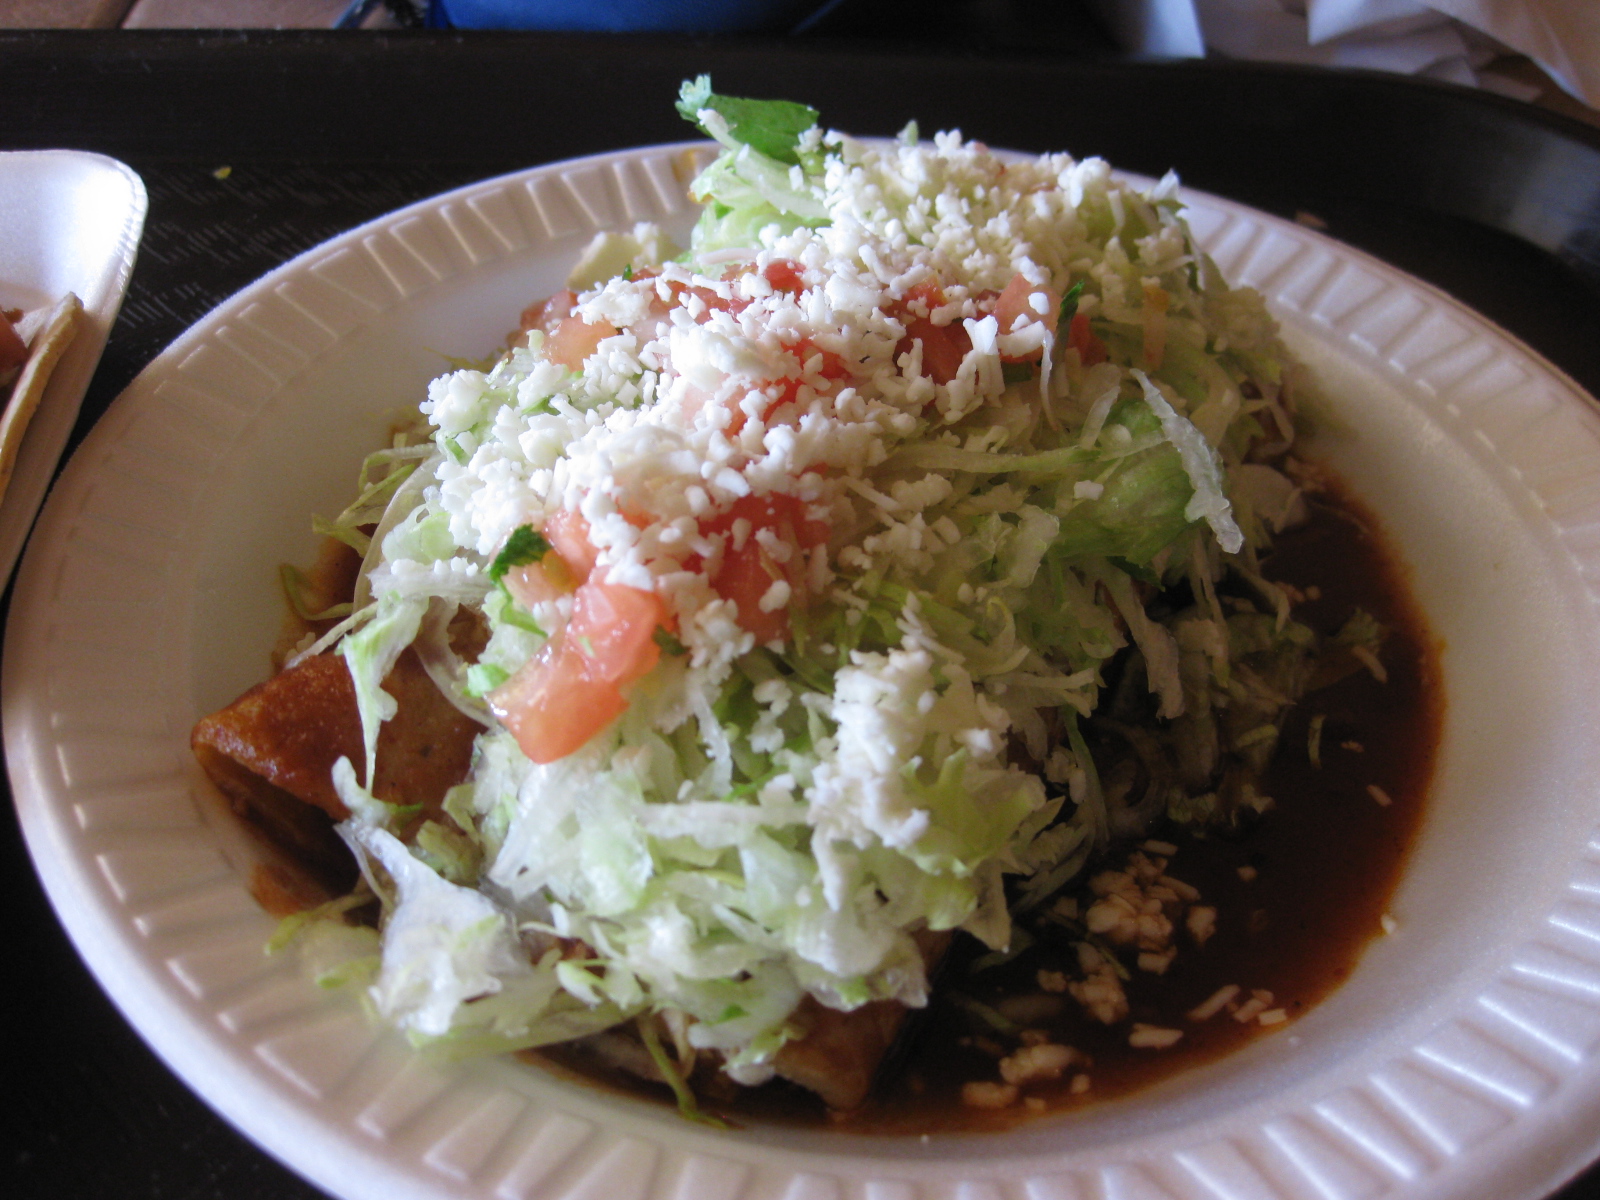 a plate with cabbage covered with sauce and rice